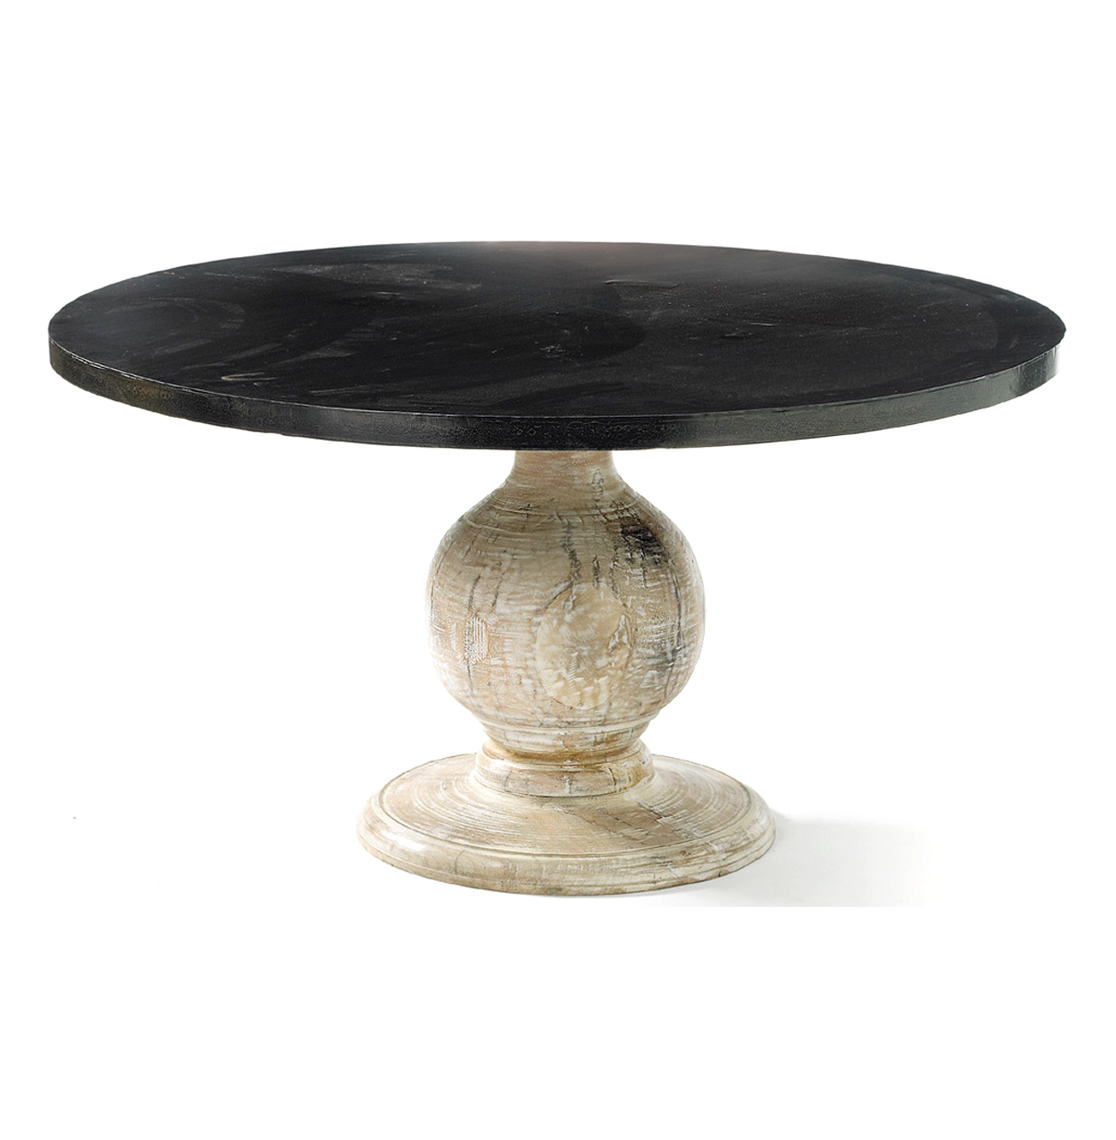 1116x1140px 7 Awesome Round Pedestal Dining Tables Picture in Furniture